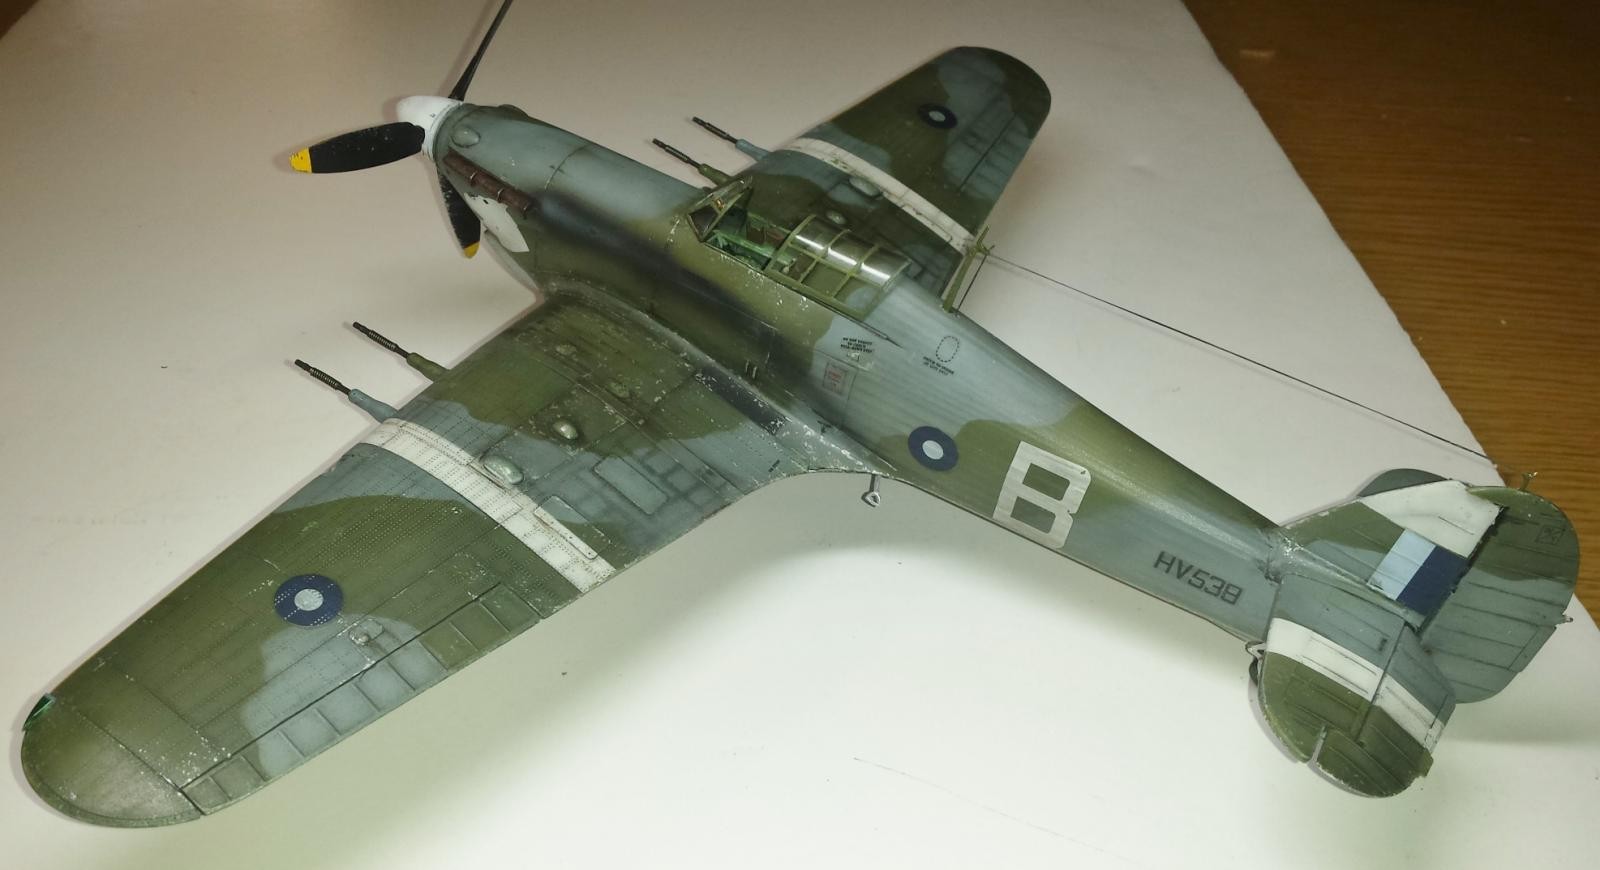 SCALE 1/32 HAWKER HURRICANE MK.2b BRITISH FIGHTER AIRCRAFT FLY 32019 